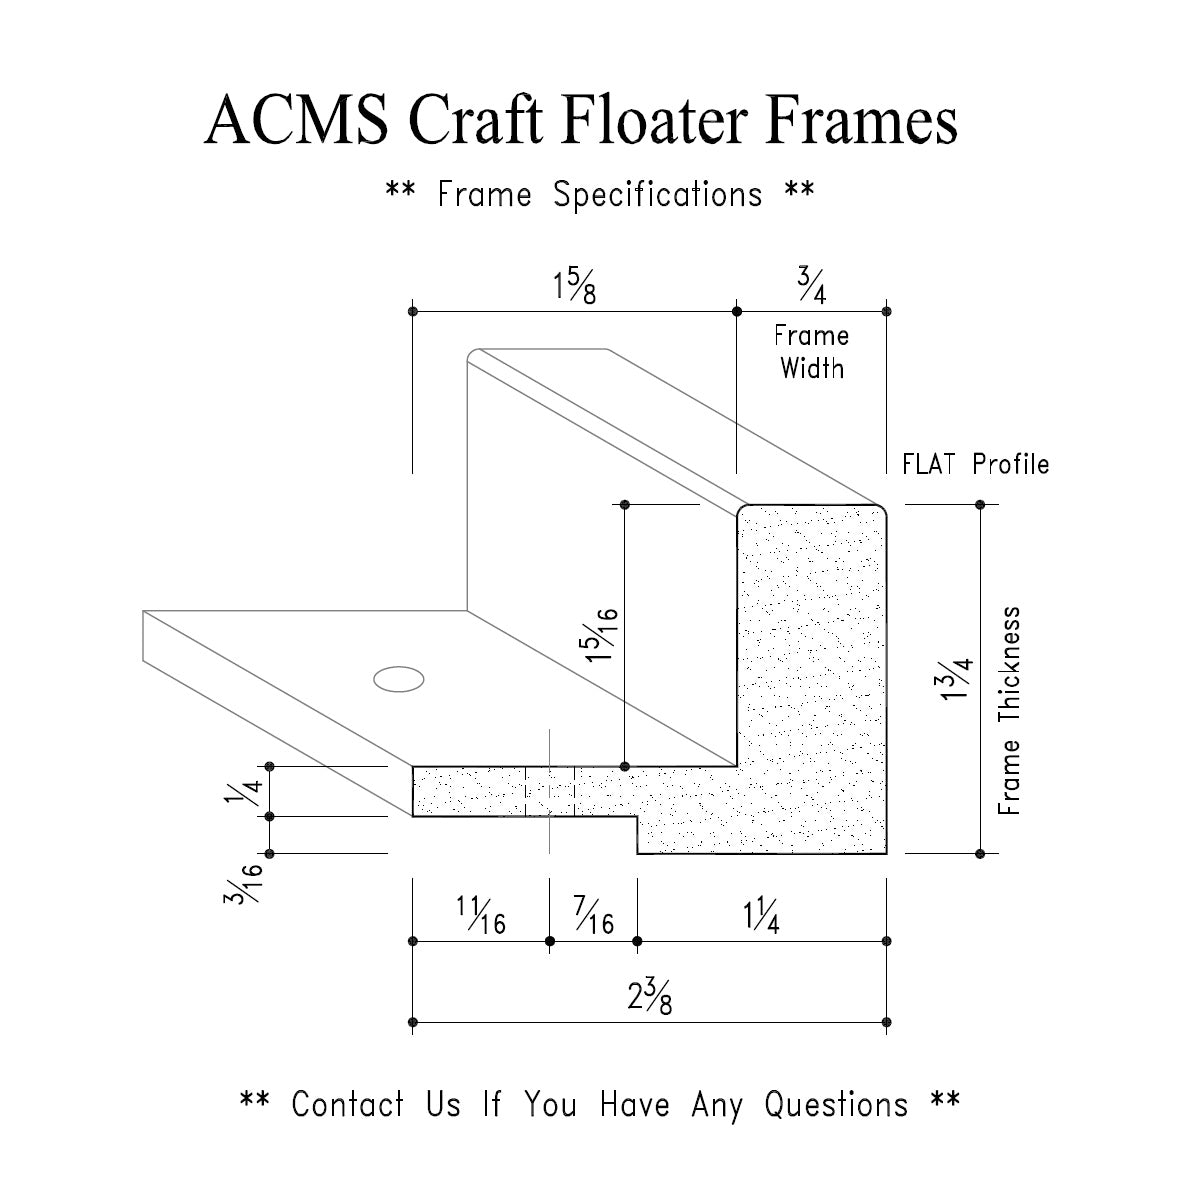 ACMS Round Craft Floater Frame - For 1 1/4" Thick Artwork - Profile 3/4" FLAT - 1 3/4" Thick Frame